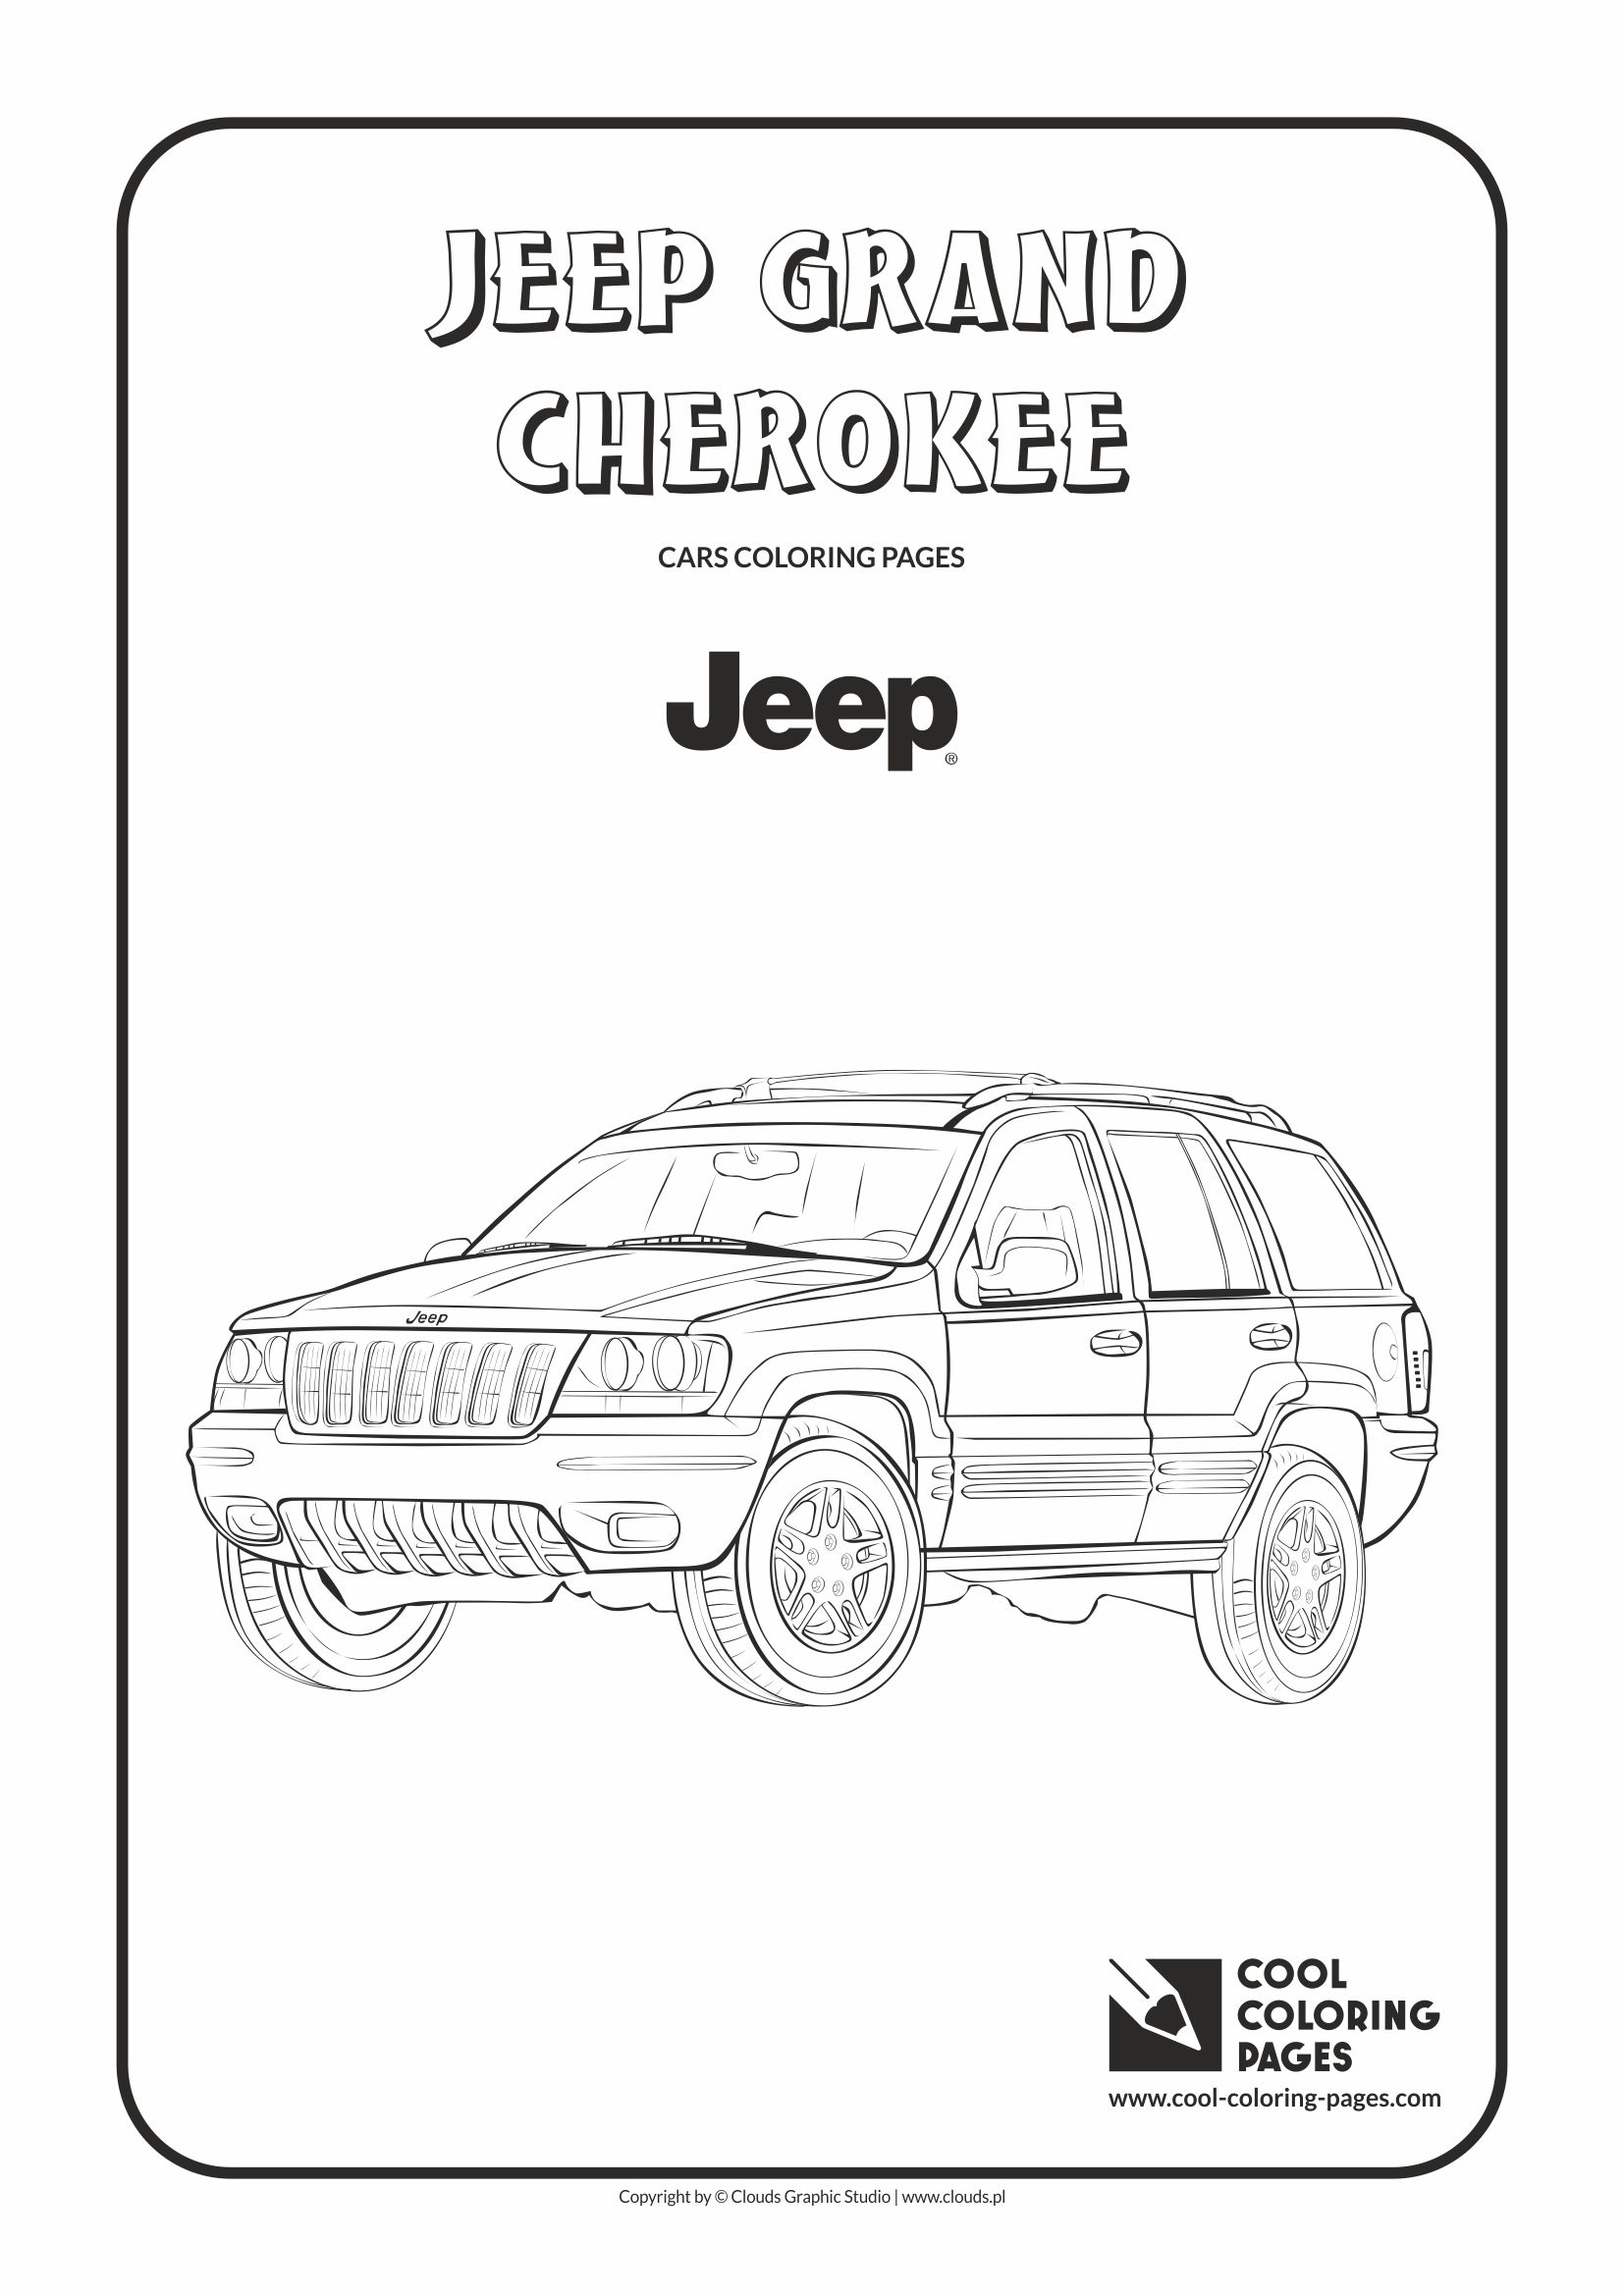 Cool Coloring Pages - Vehicles / Jeep Grand Cherokee / Coloring page with Jeep Grand Cherokee